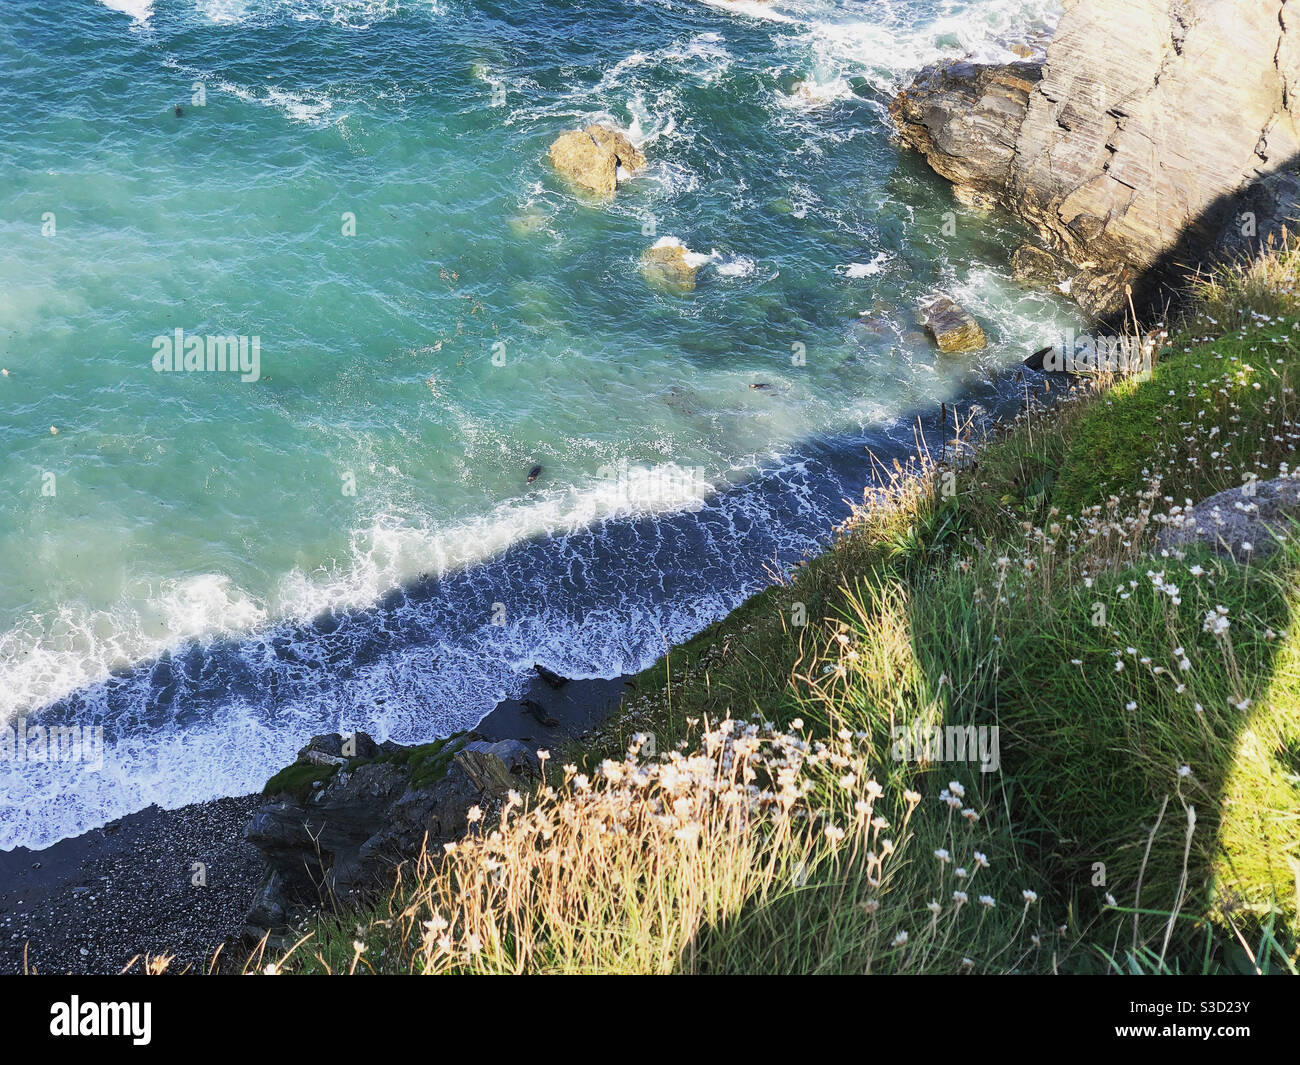 Photograph of sea taken from cliffs above Stock Photo